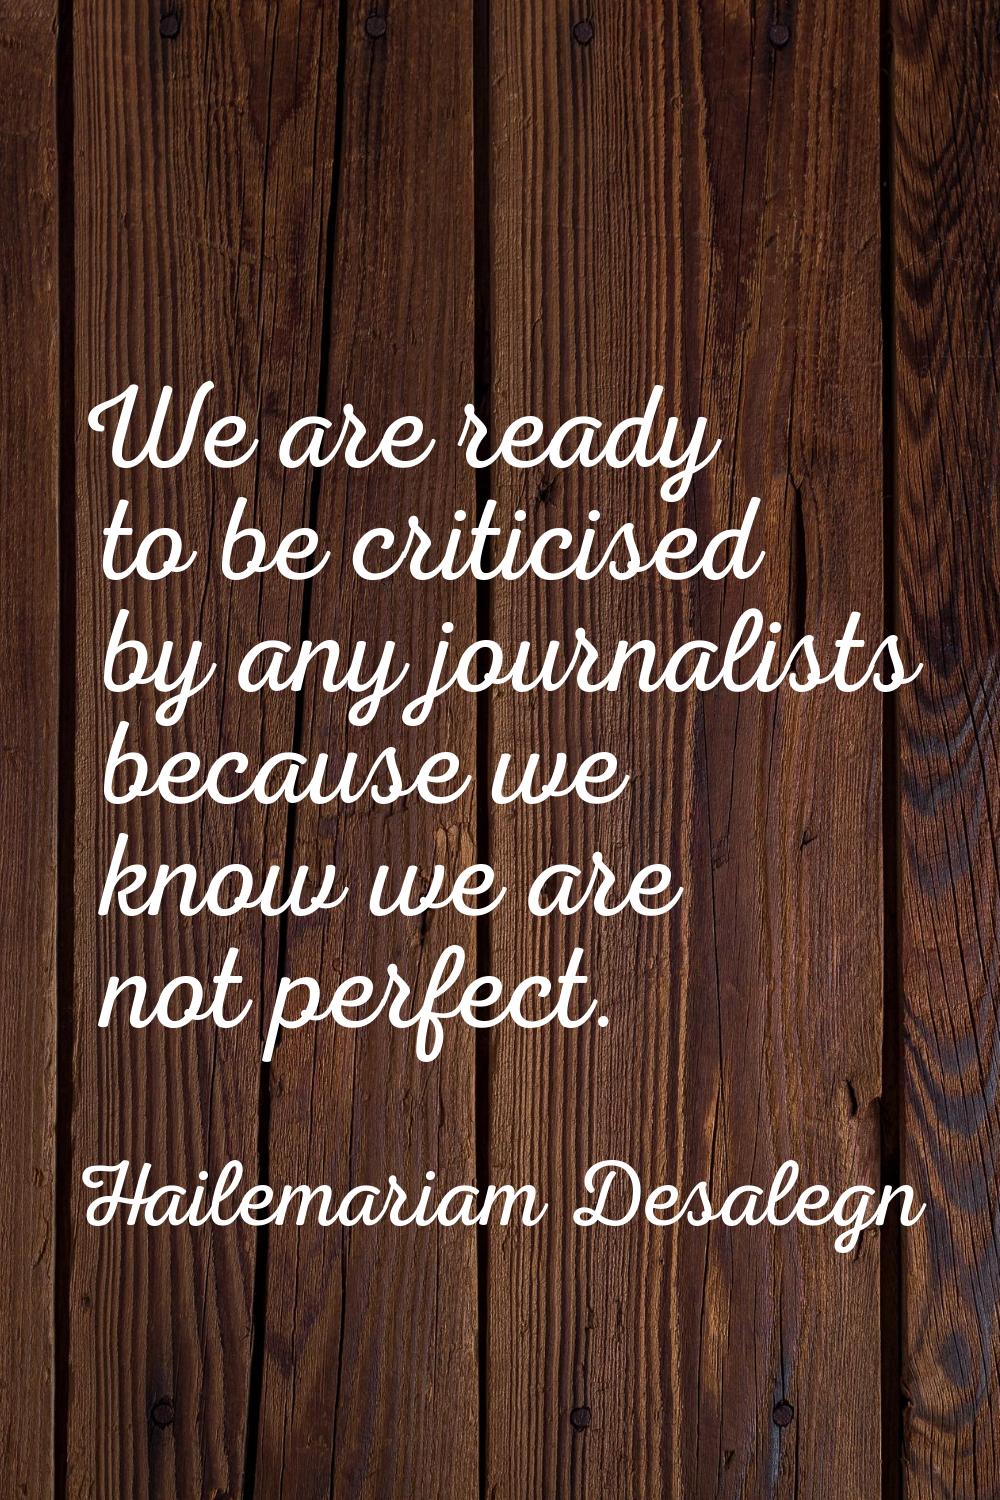 We are ready to be criticised by any journalists because we know we are not perfect.